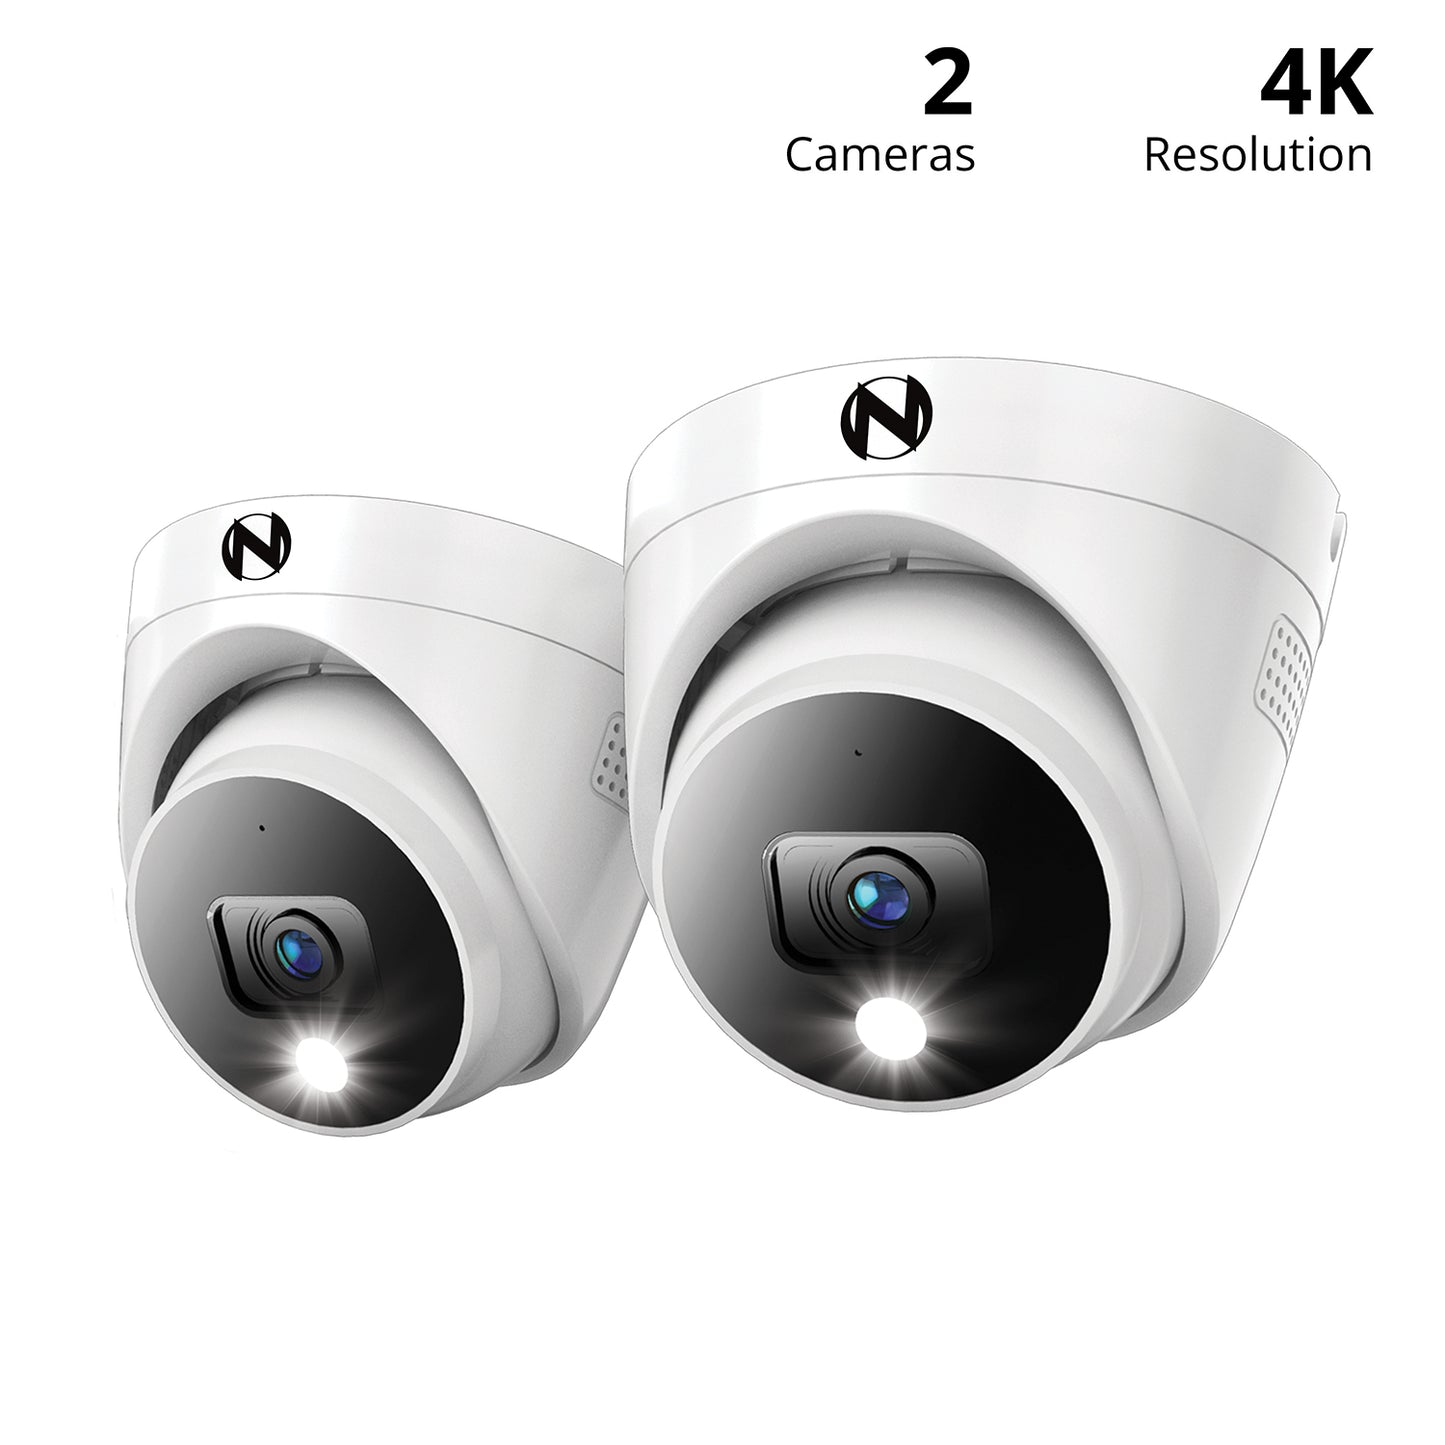 Add On Wired 4K Deterrence Dome Cameras with 2-Way Audio - 2 Pack - White